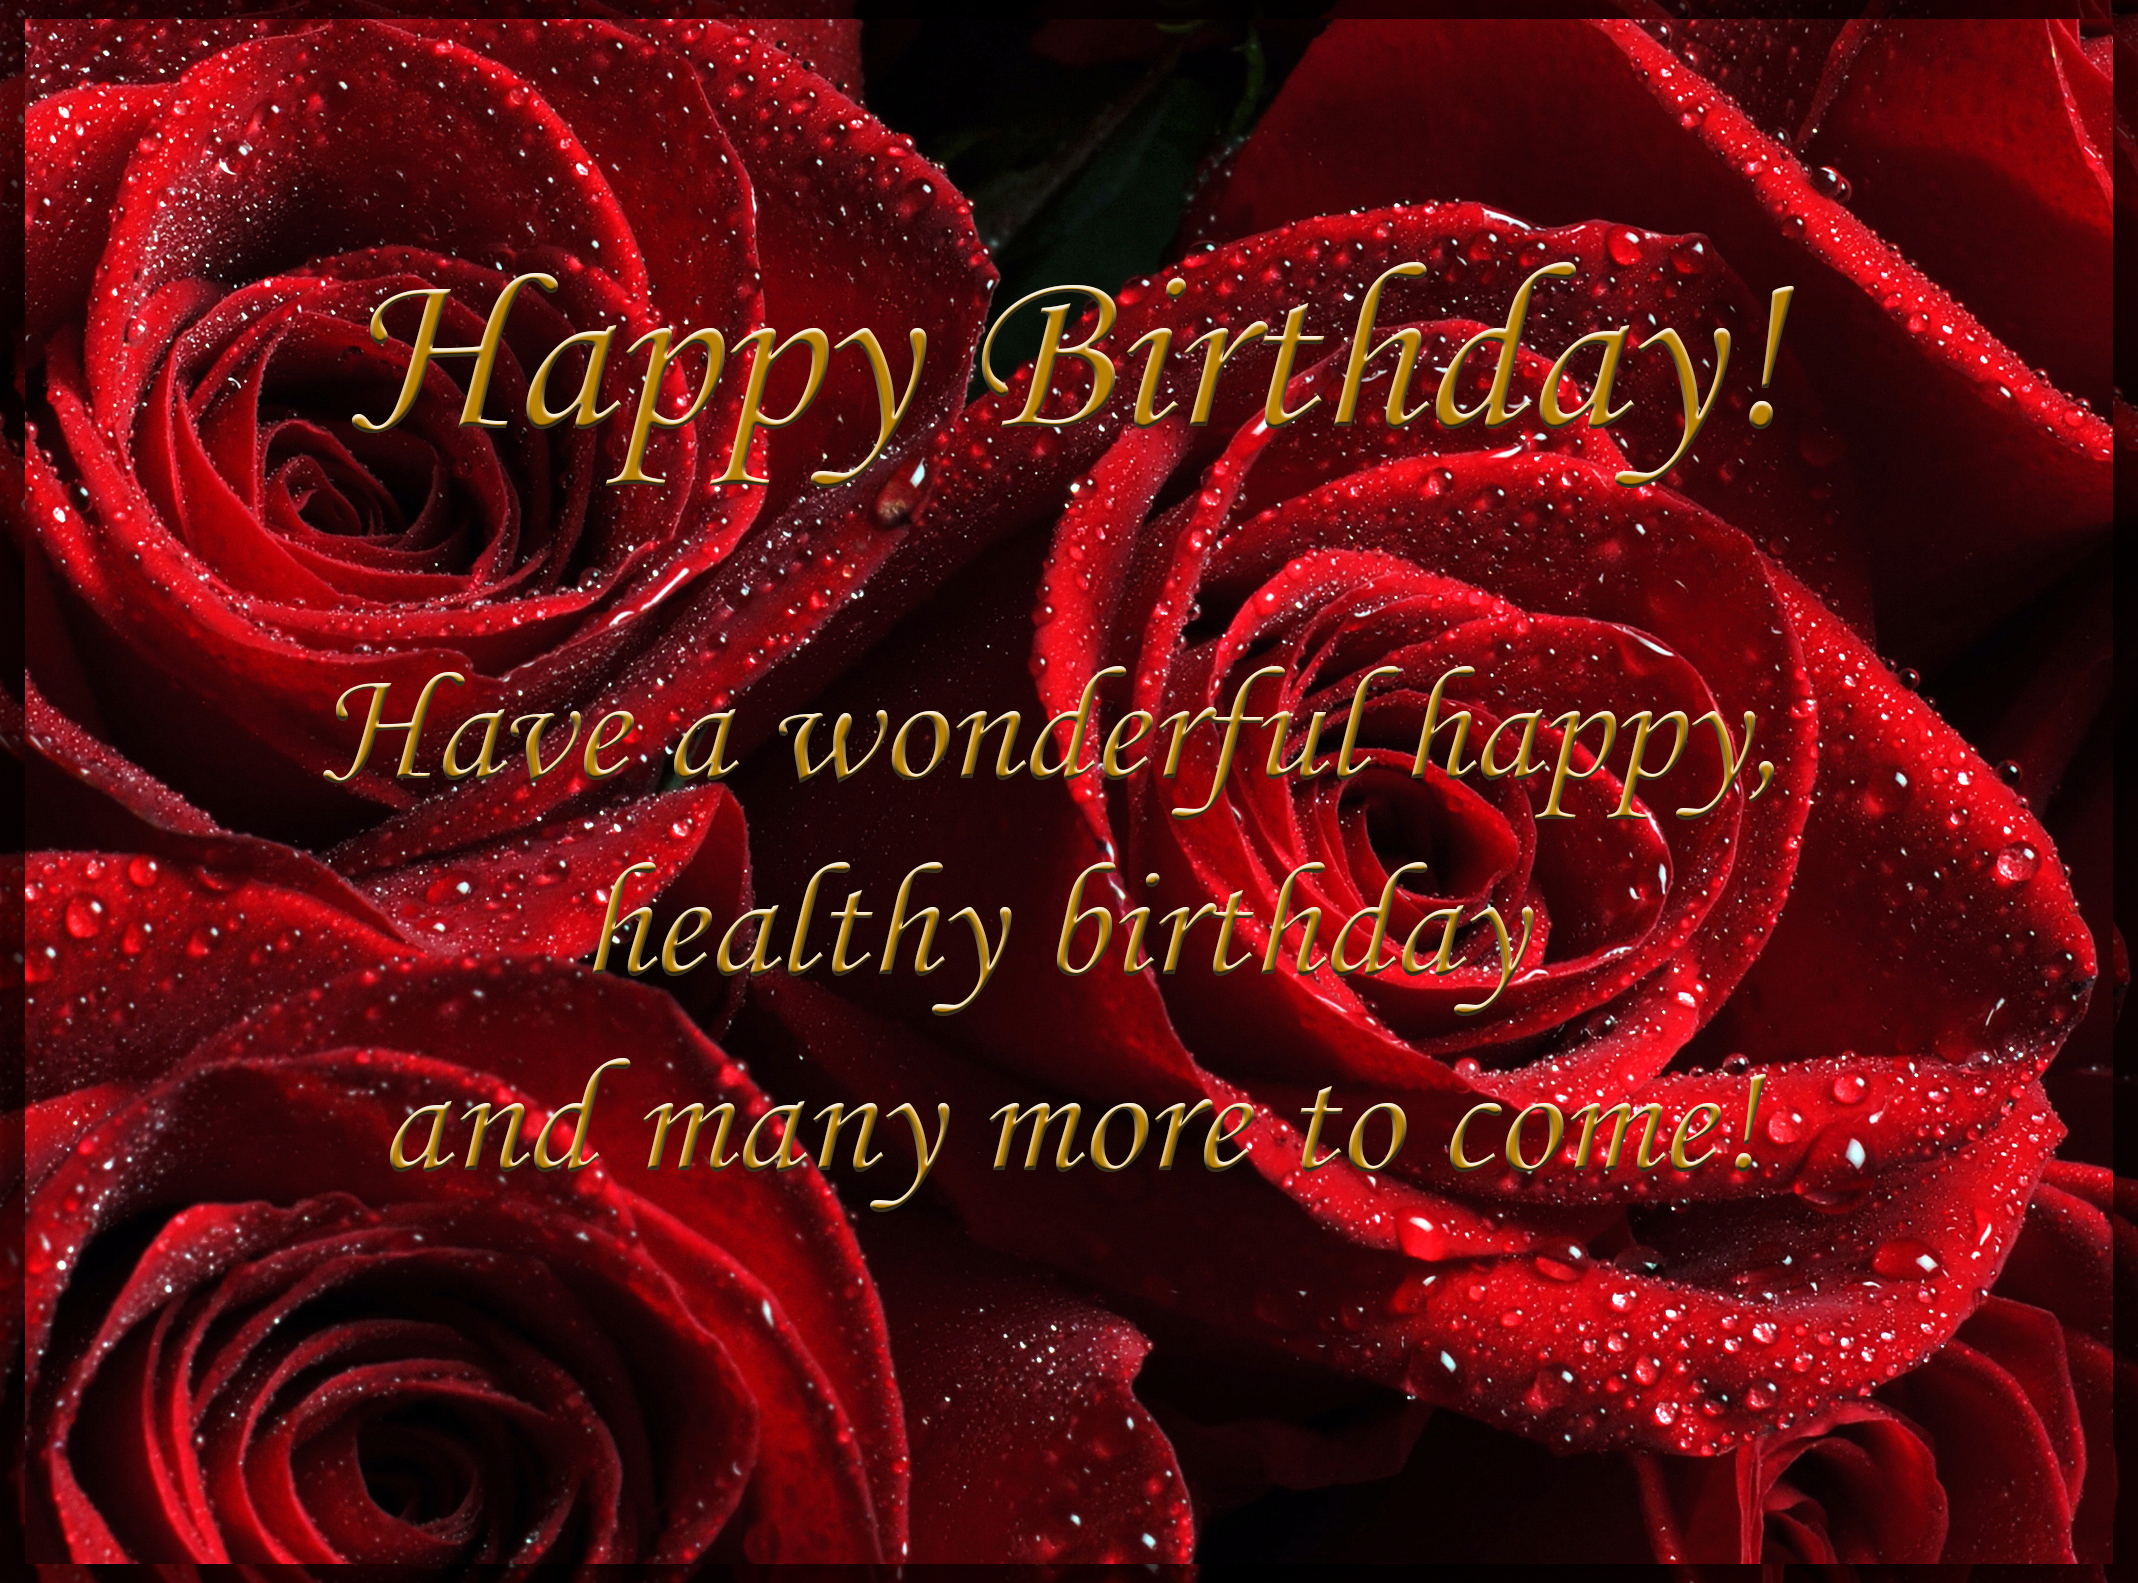 Happy Birthday Card With Red Roses Gallery Yopriceville High